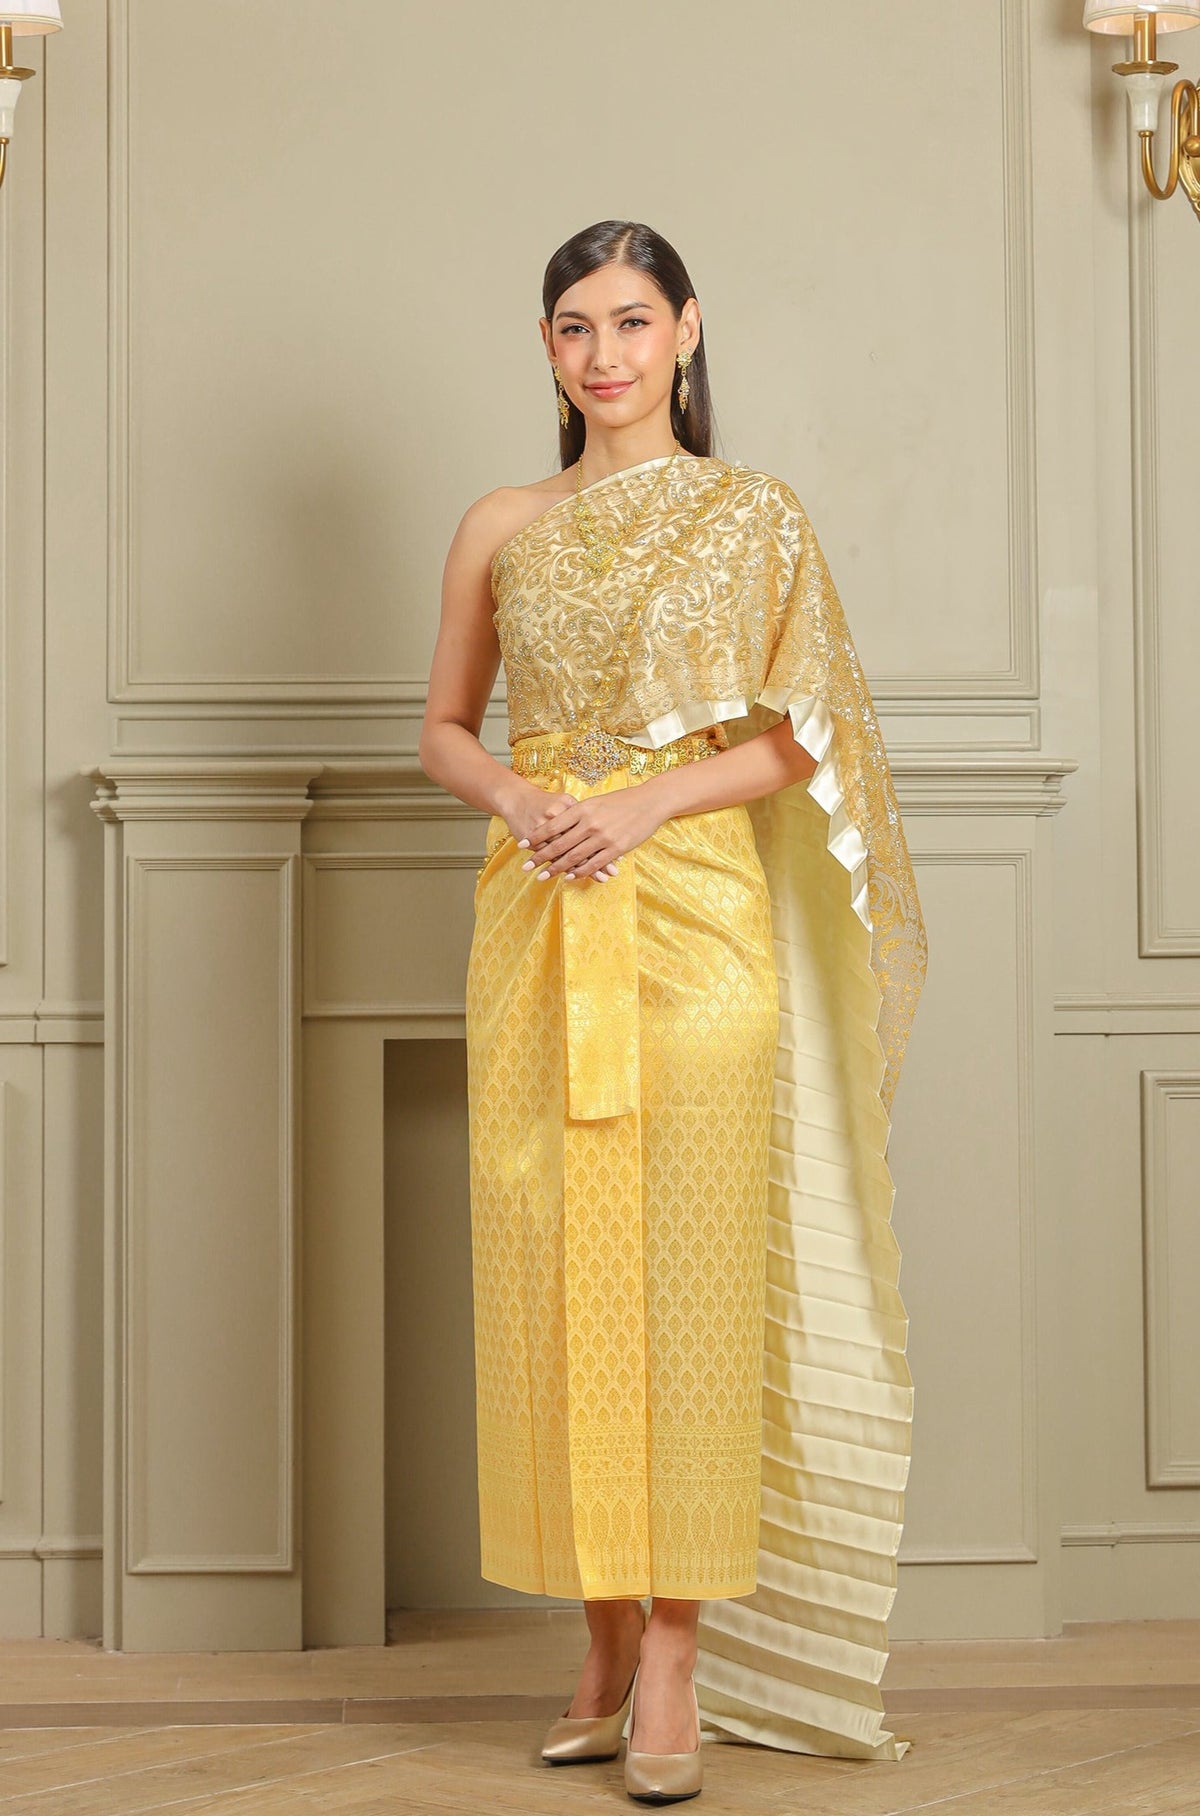 A classic gold traditional Thai dress to celebrate your special day.